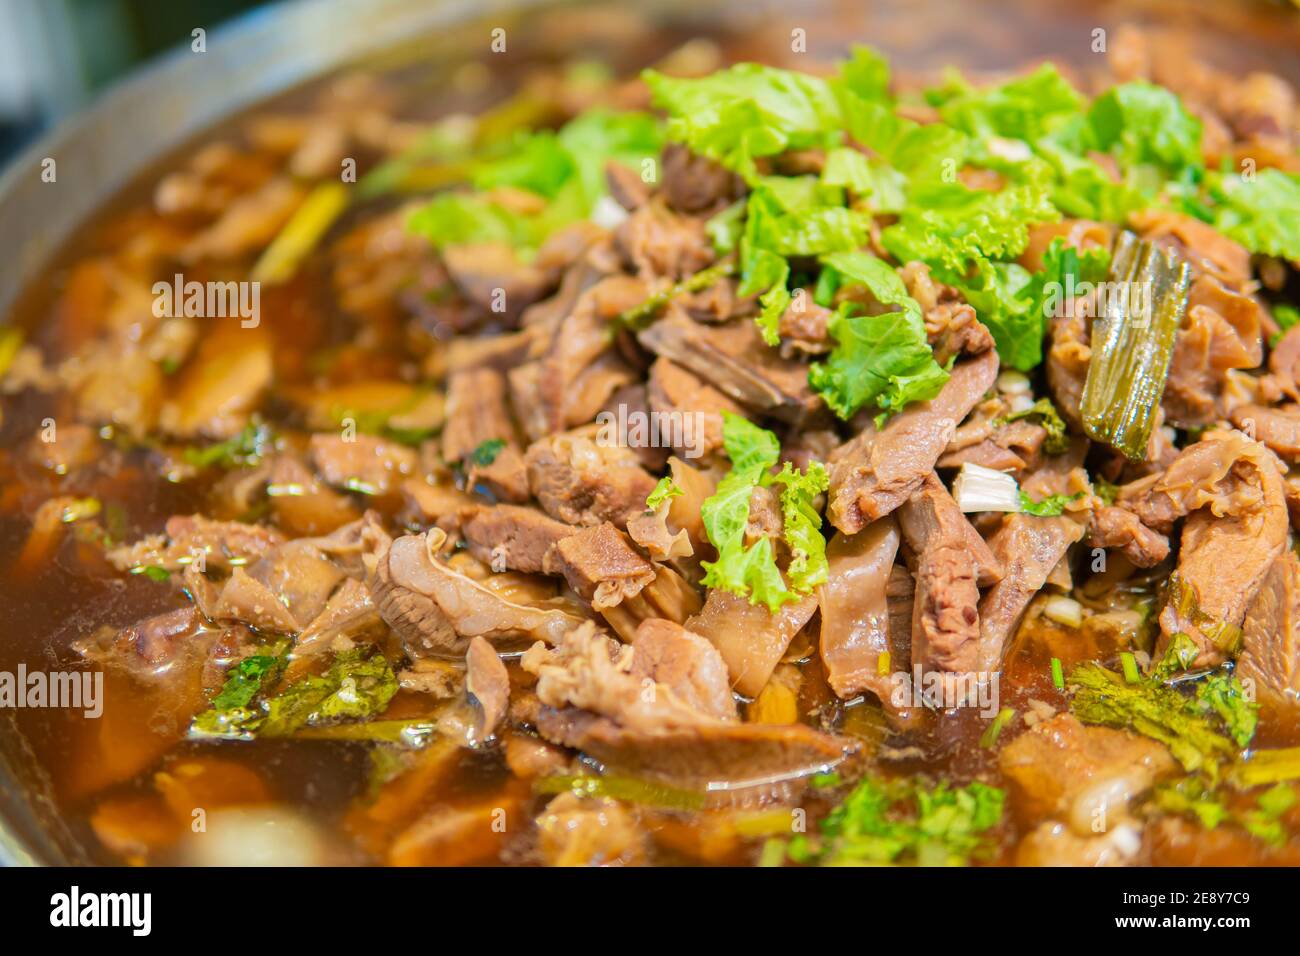 Macro close up shot of Pork stewed in the gravy with green coriander leaves on top and soup. Thai food. Stock Photo